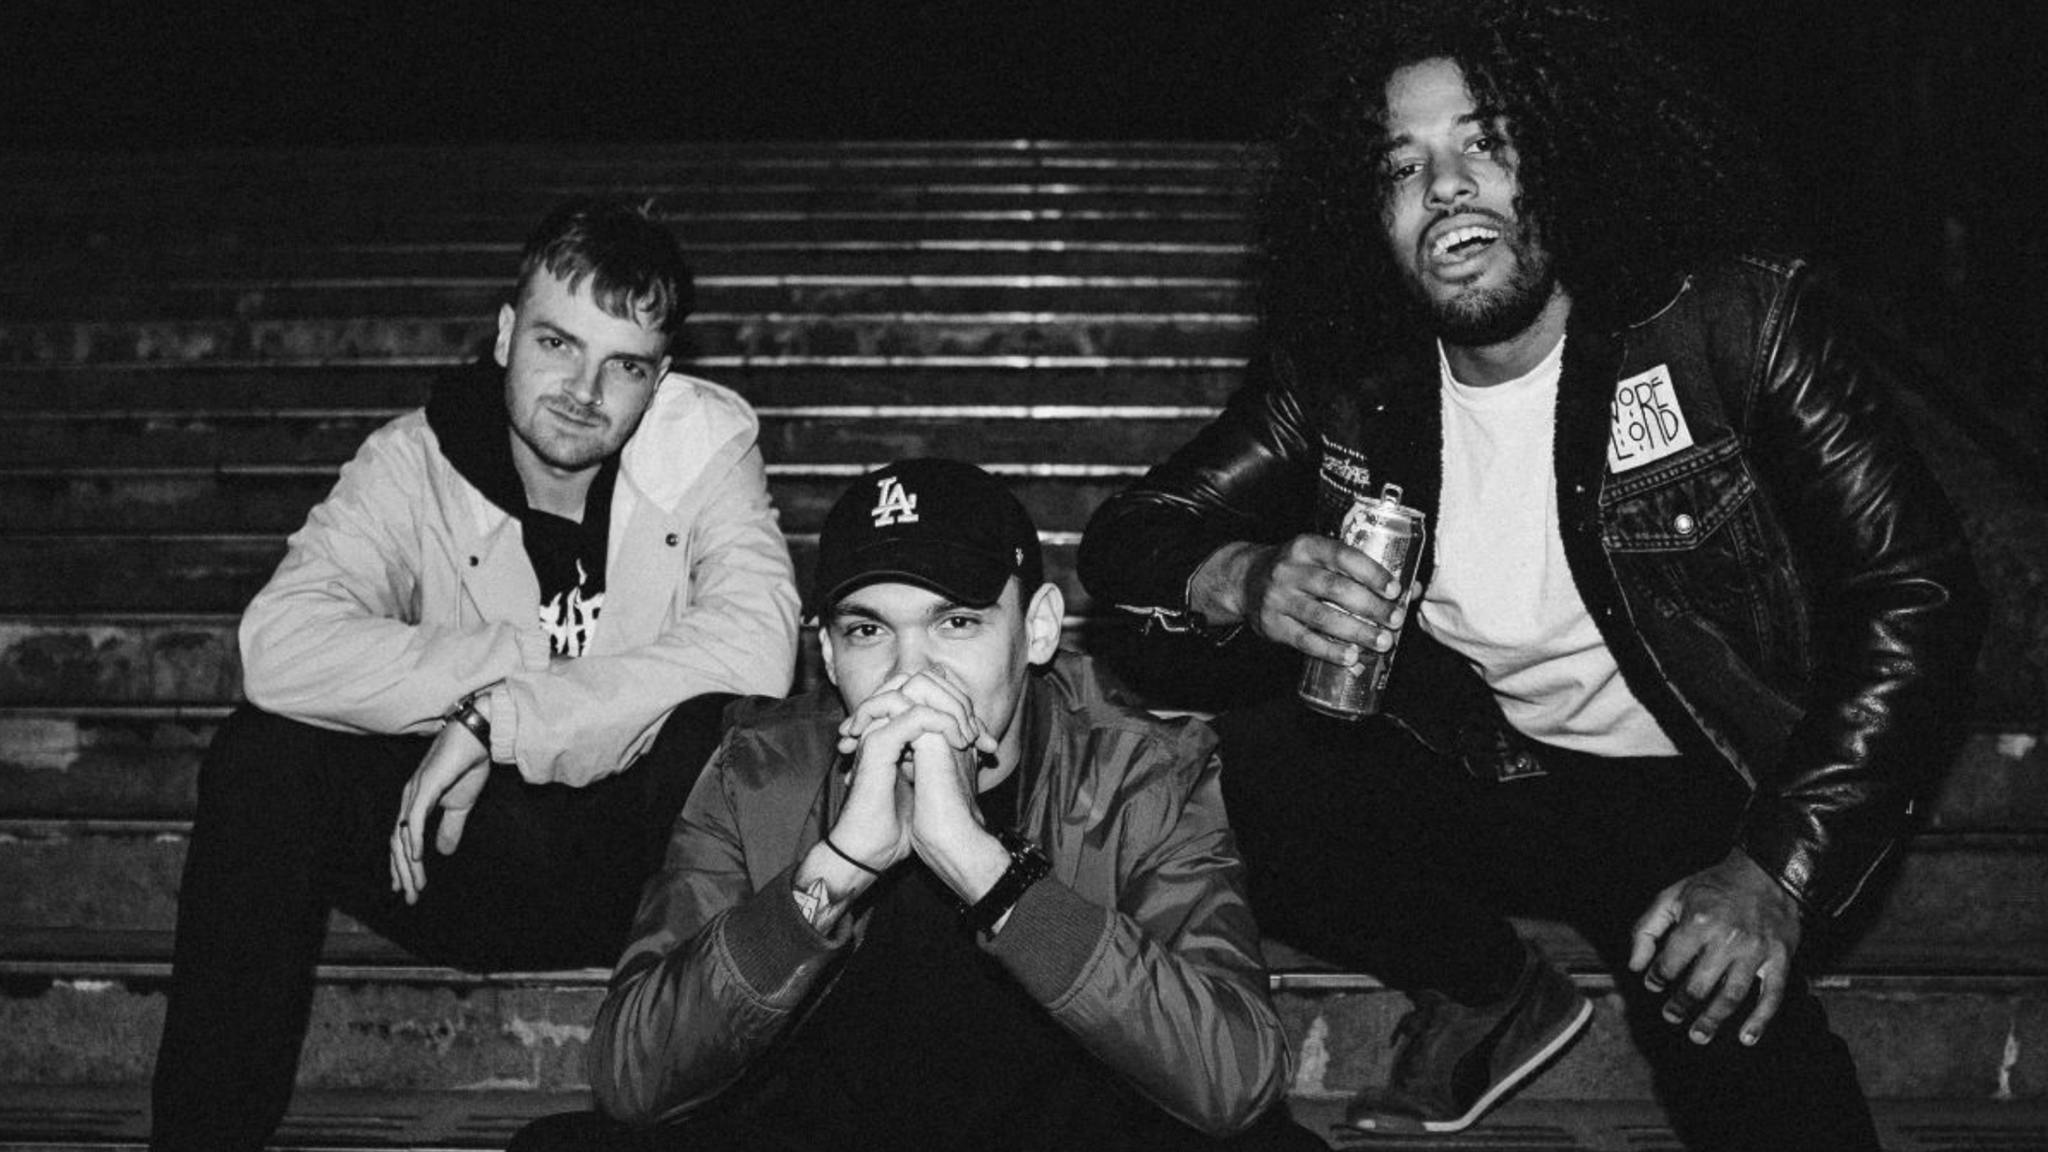 Issues’ remaining members are going to play three final shows